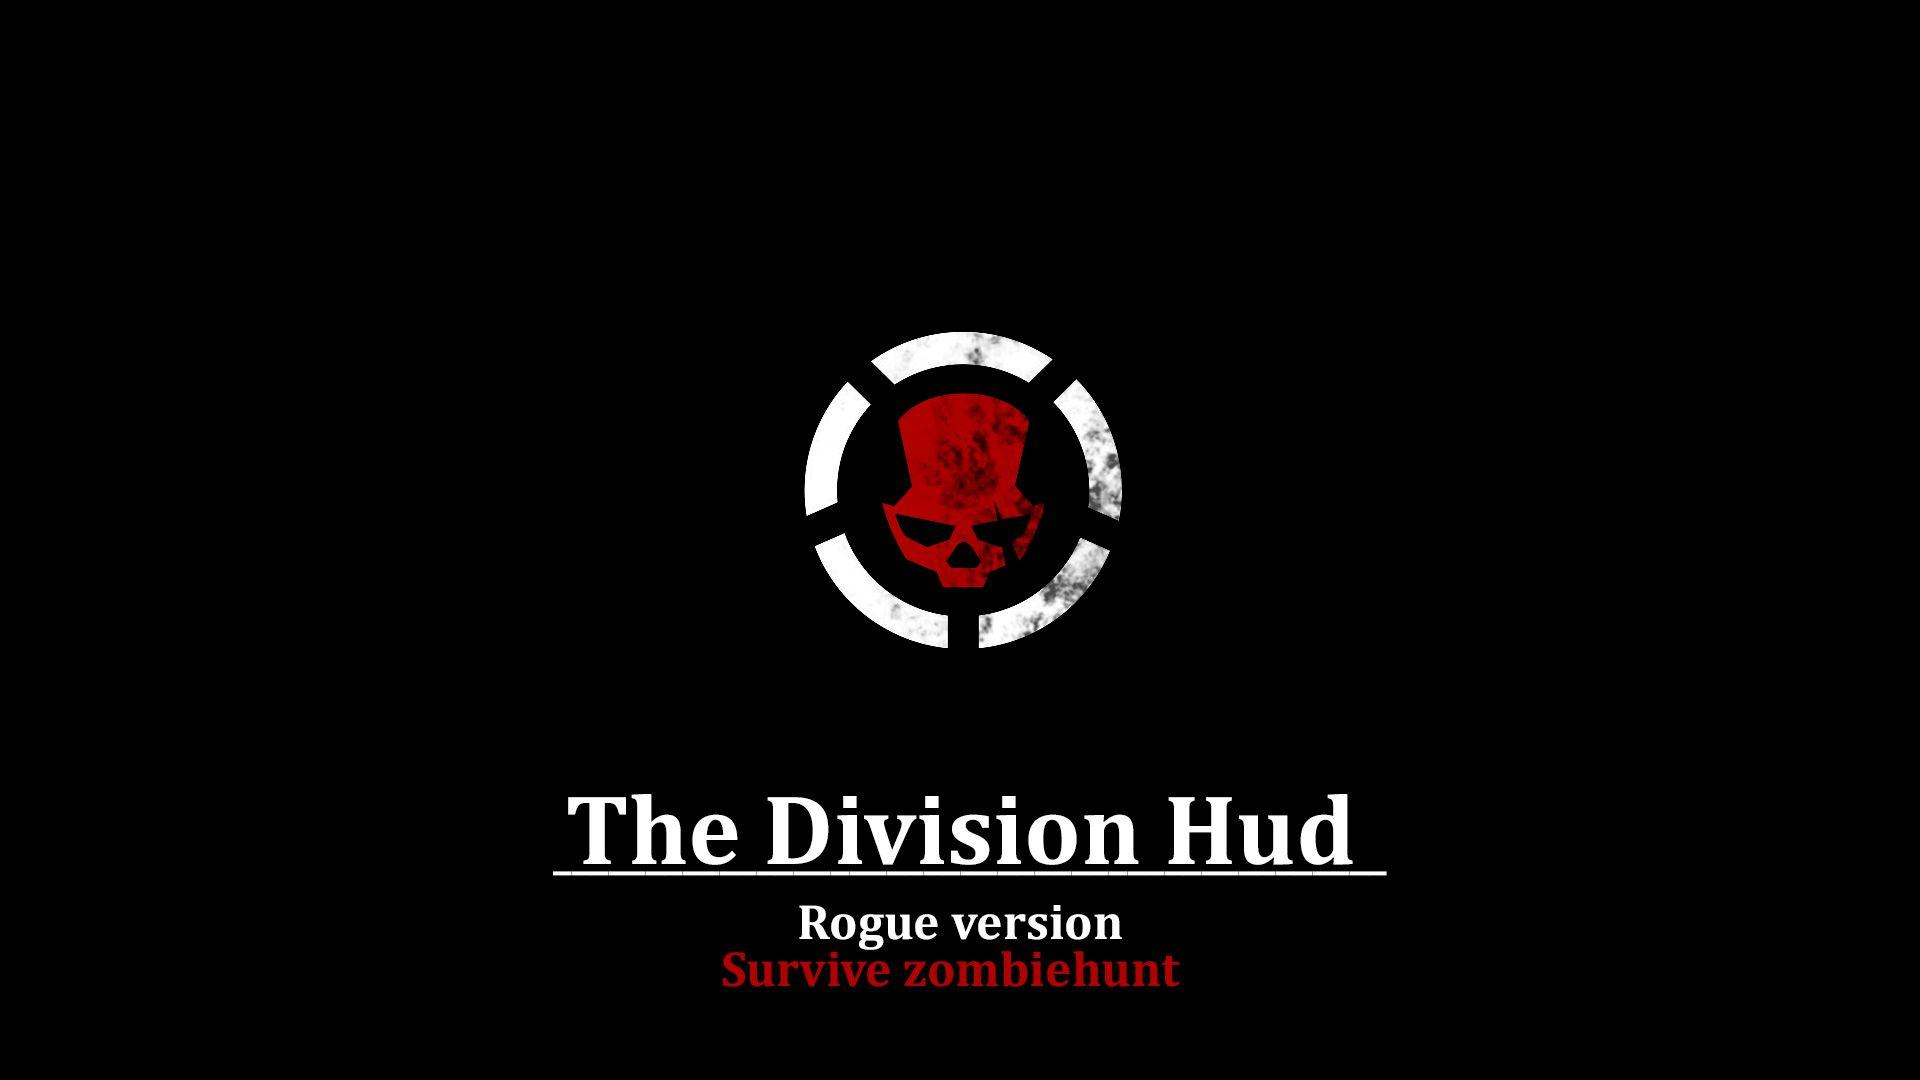 The Division Rogue Logo - Steam Workshop :: The Division HUD [rogue version]